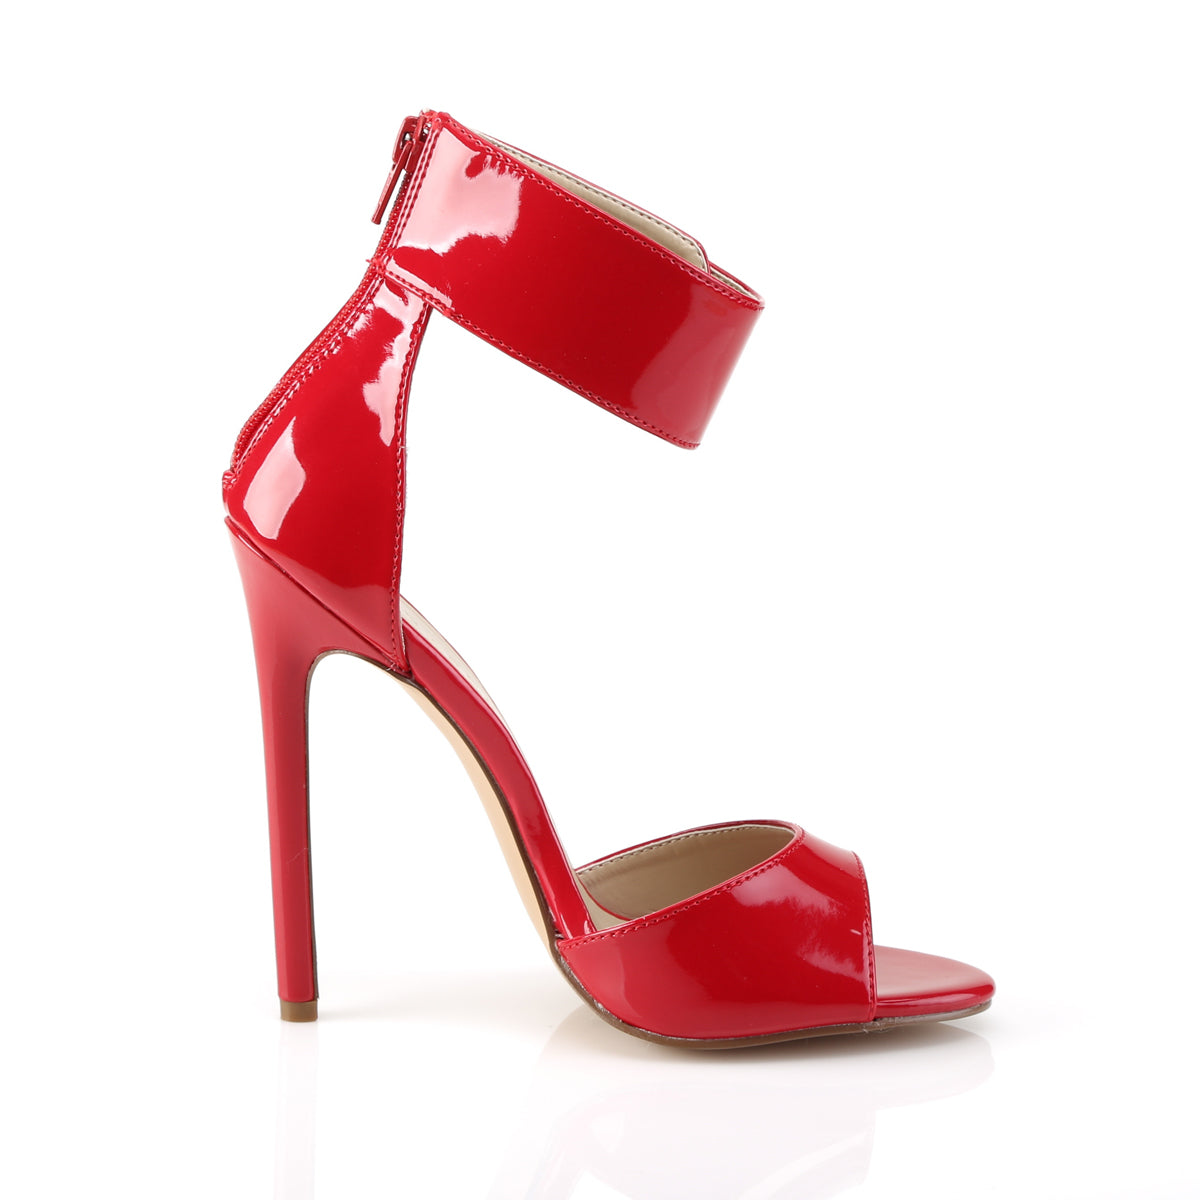 SEXY-19 Red Patent Sandal Pleaser